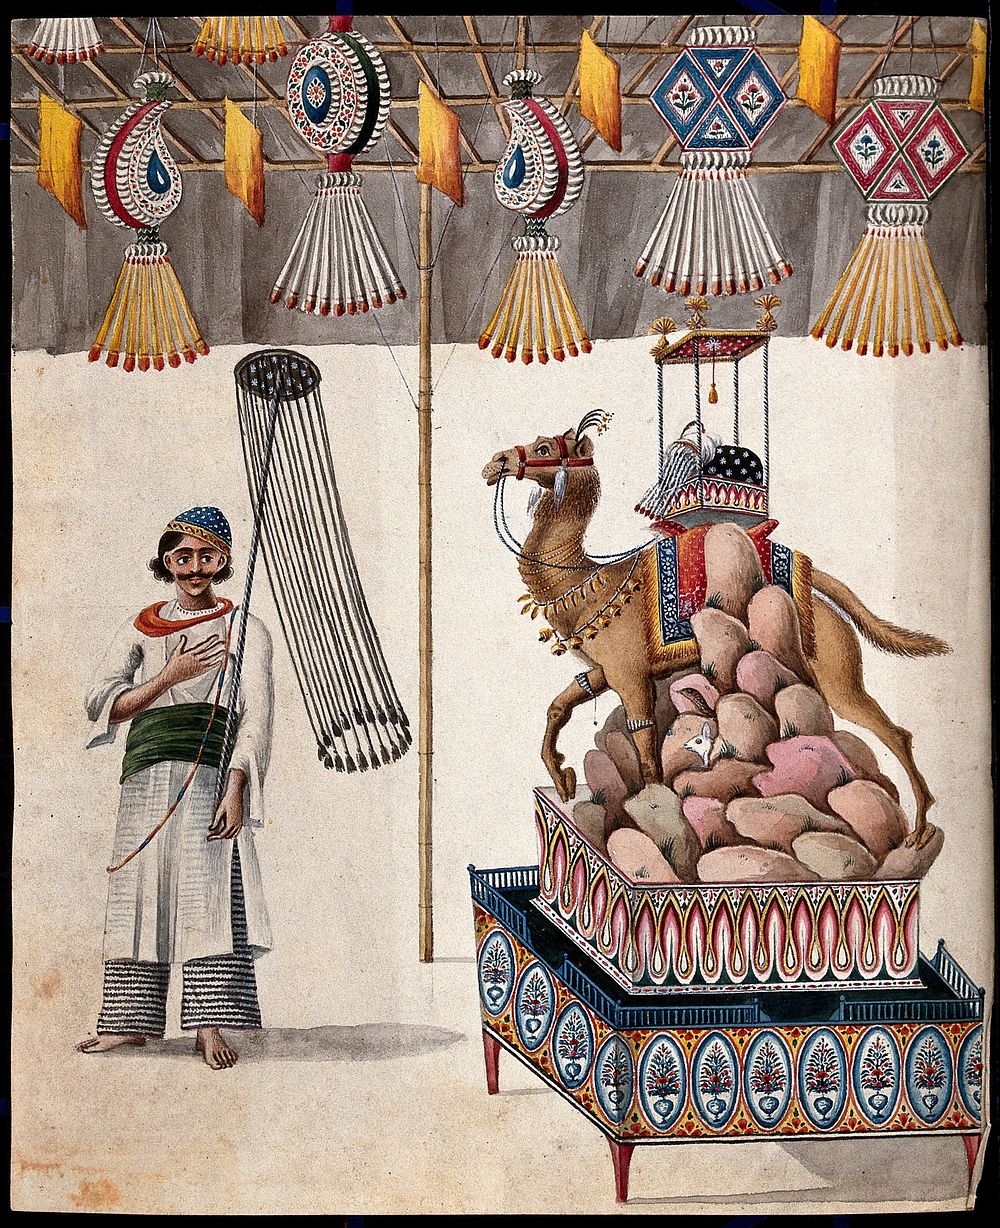 A man carrying a ceremonial object stands next to a tableau of rocks, a camel, decorated headgear and other animals set on…